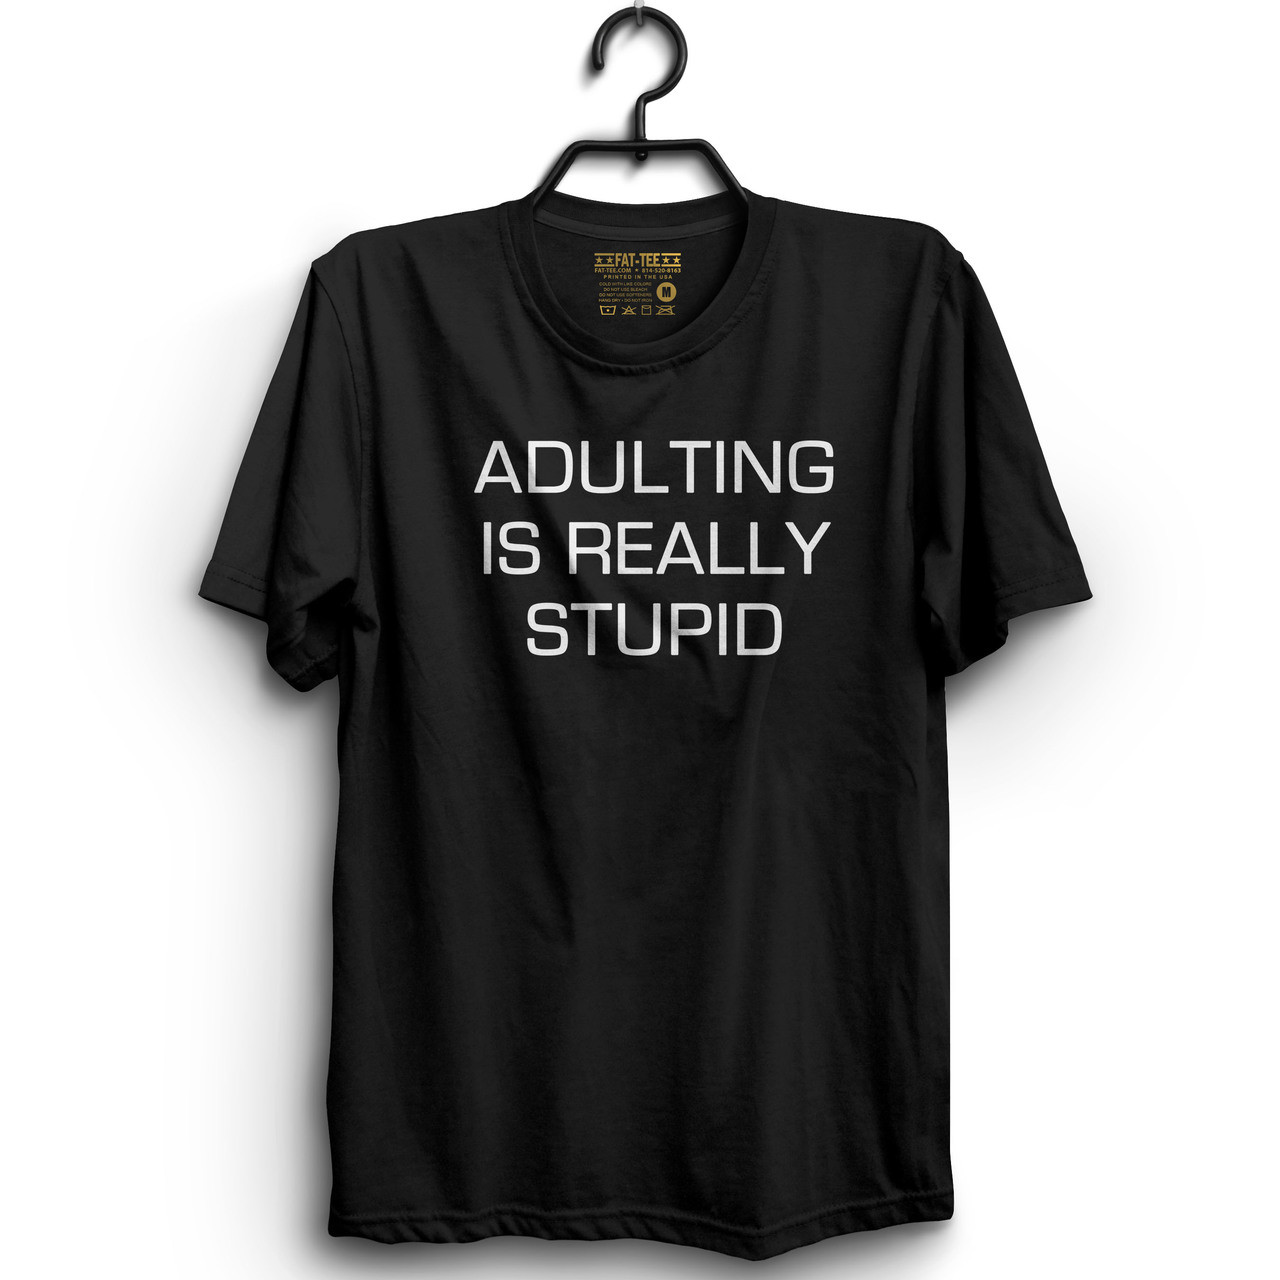 Adulting is Stupid T-Shirt